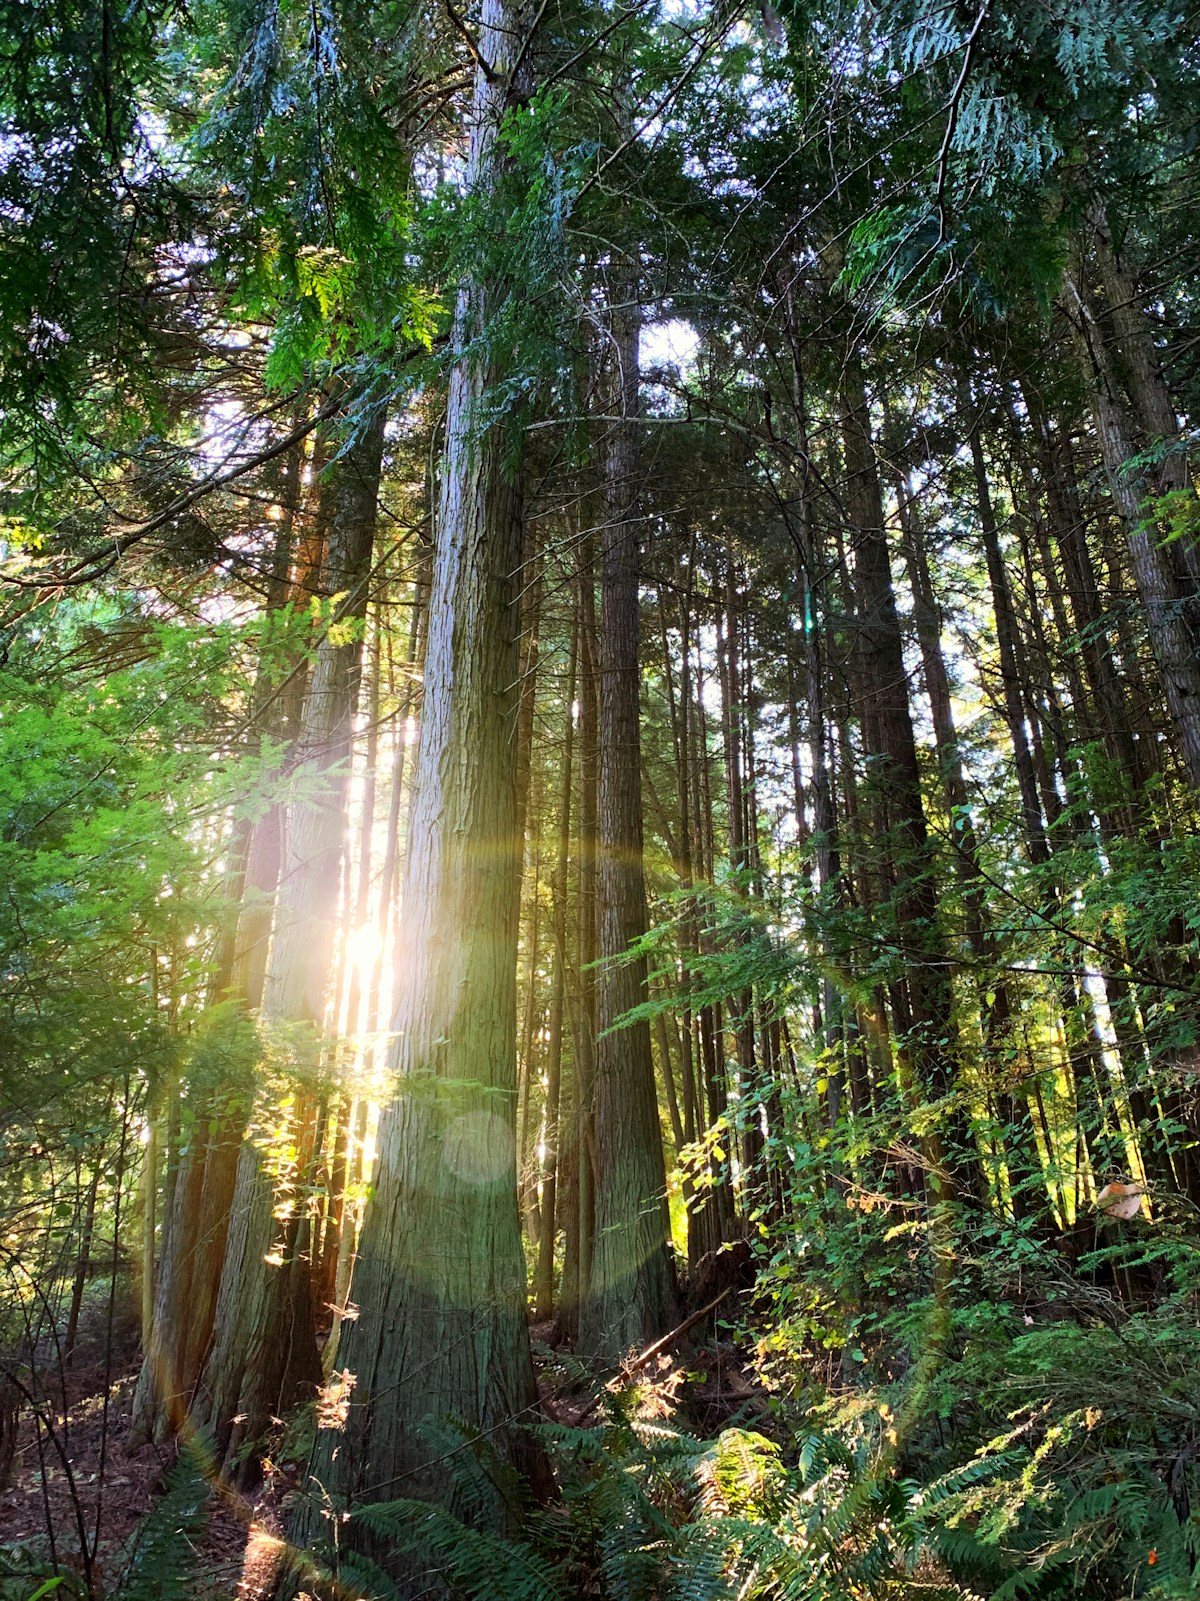 The sunlight peaking through the trees in a dense forest.